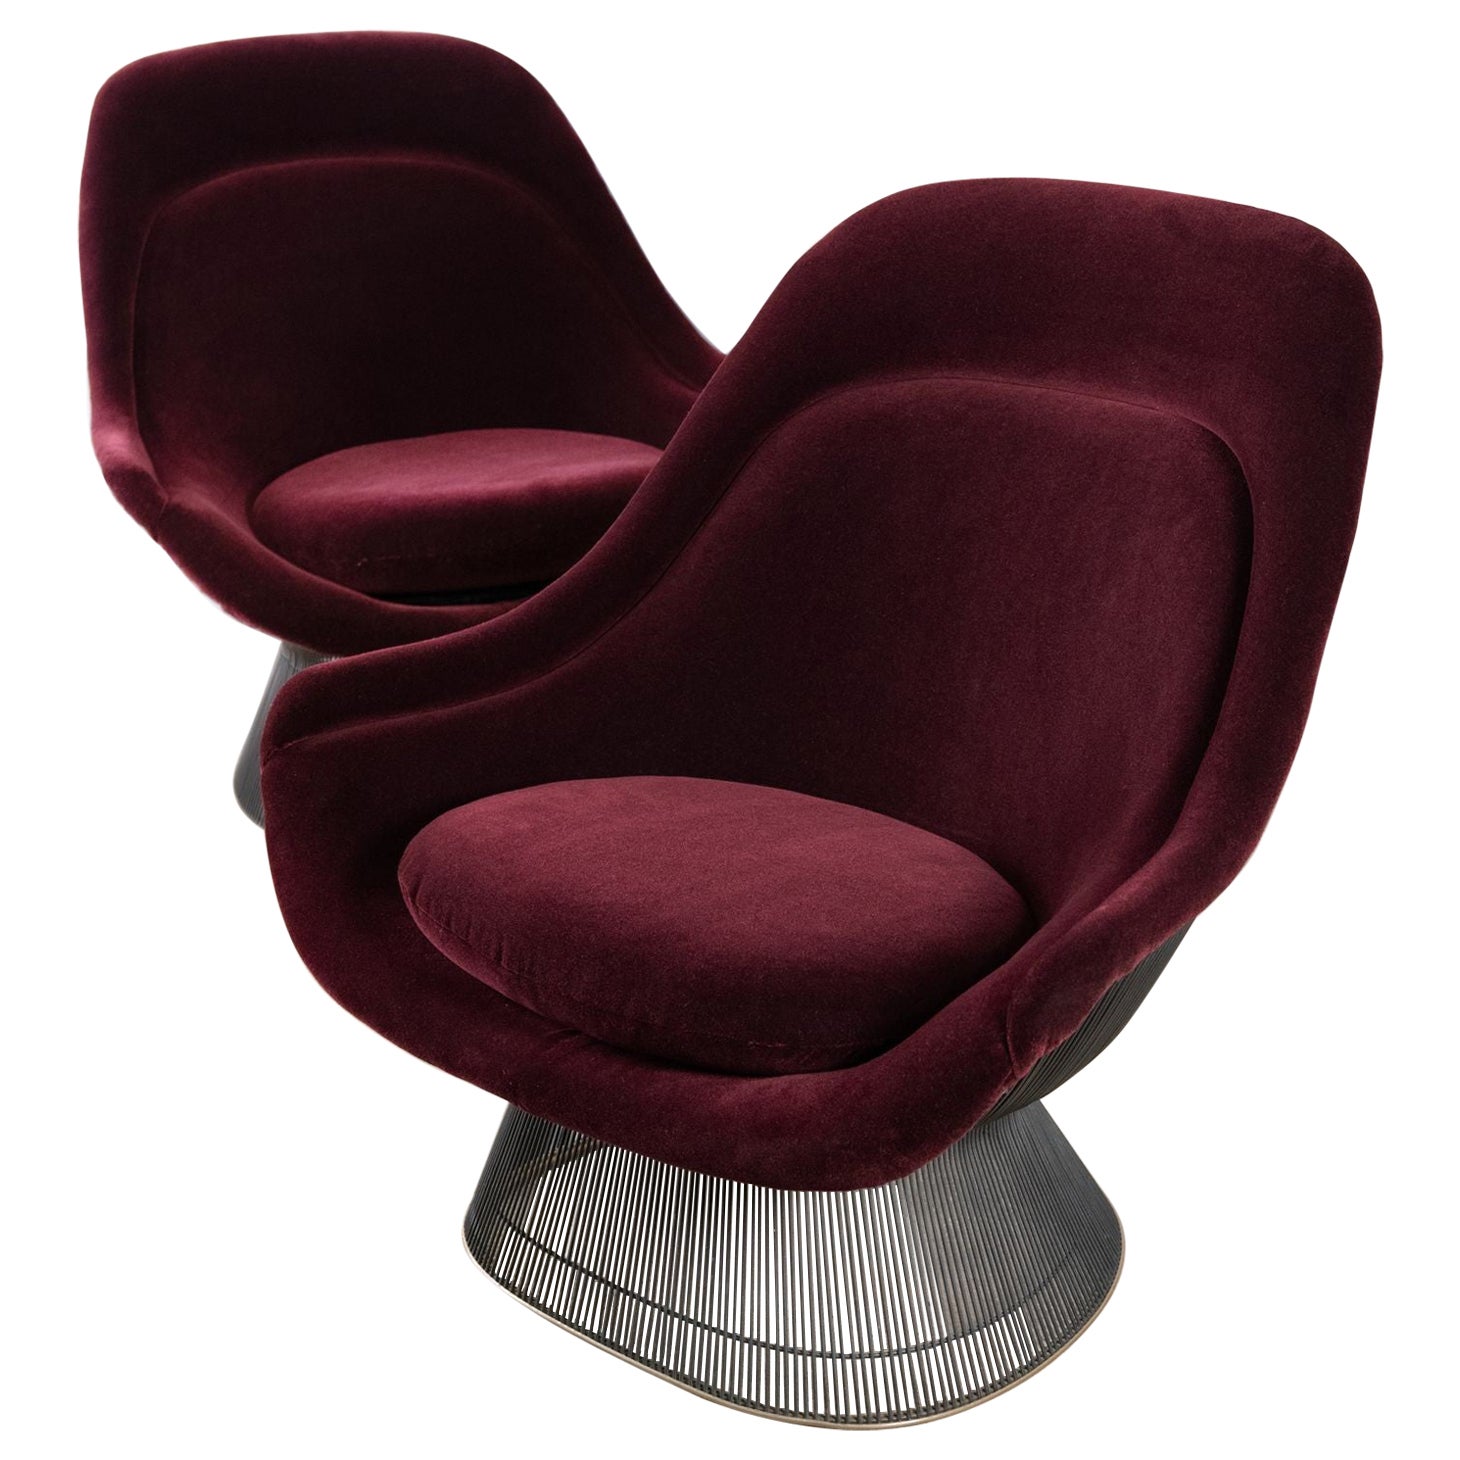 Pair of High Back Lounge Chairs & Ottoman by Warren Platner for Knoll